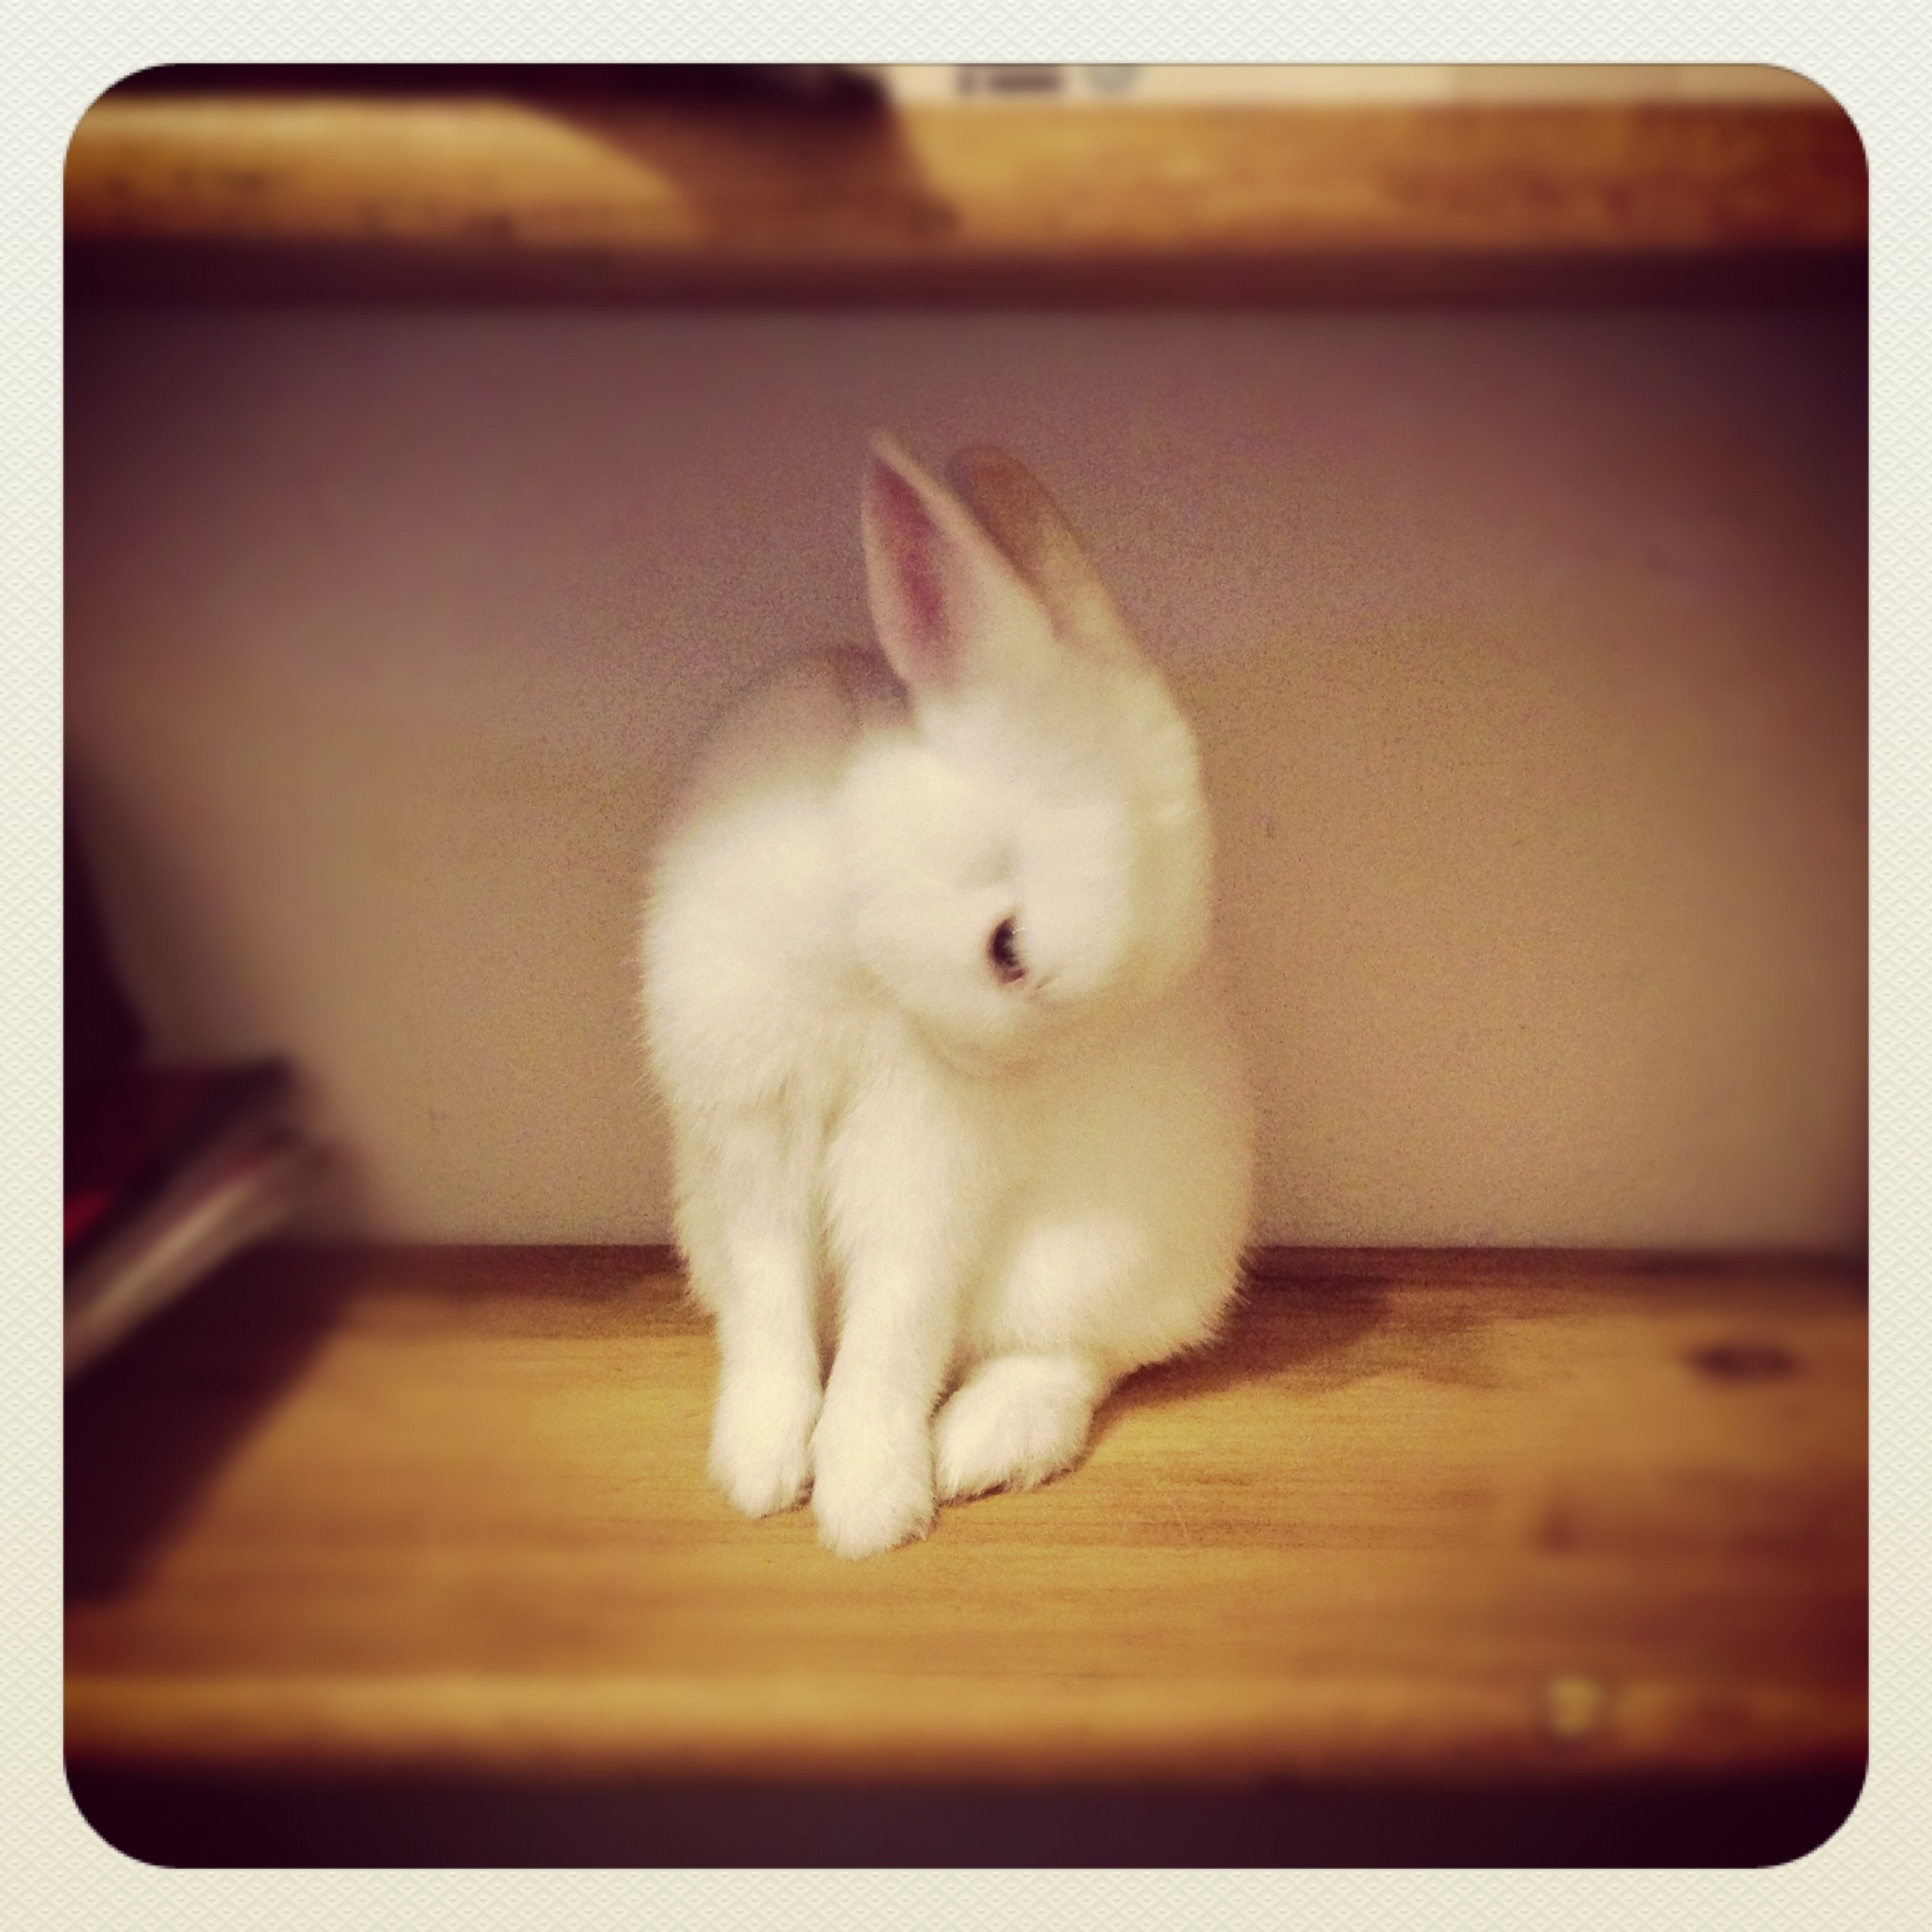 Bunny Finds a Place on the Shelf for a Grooming Session